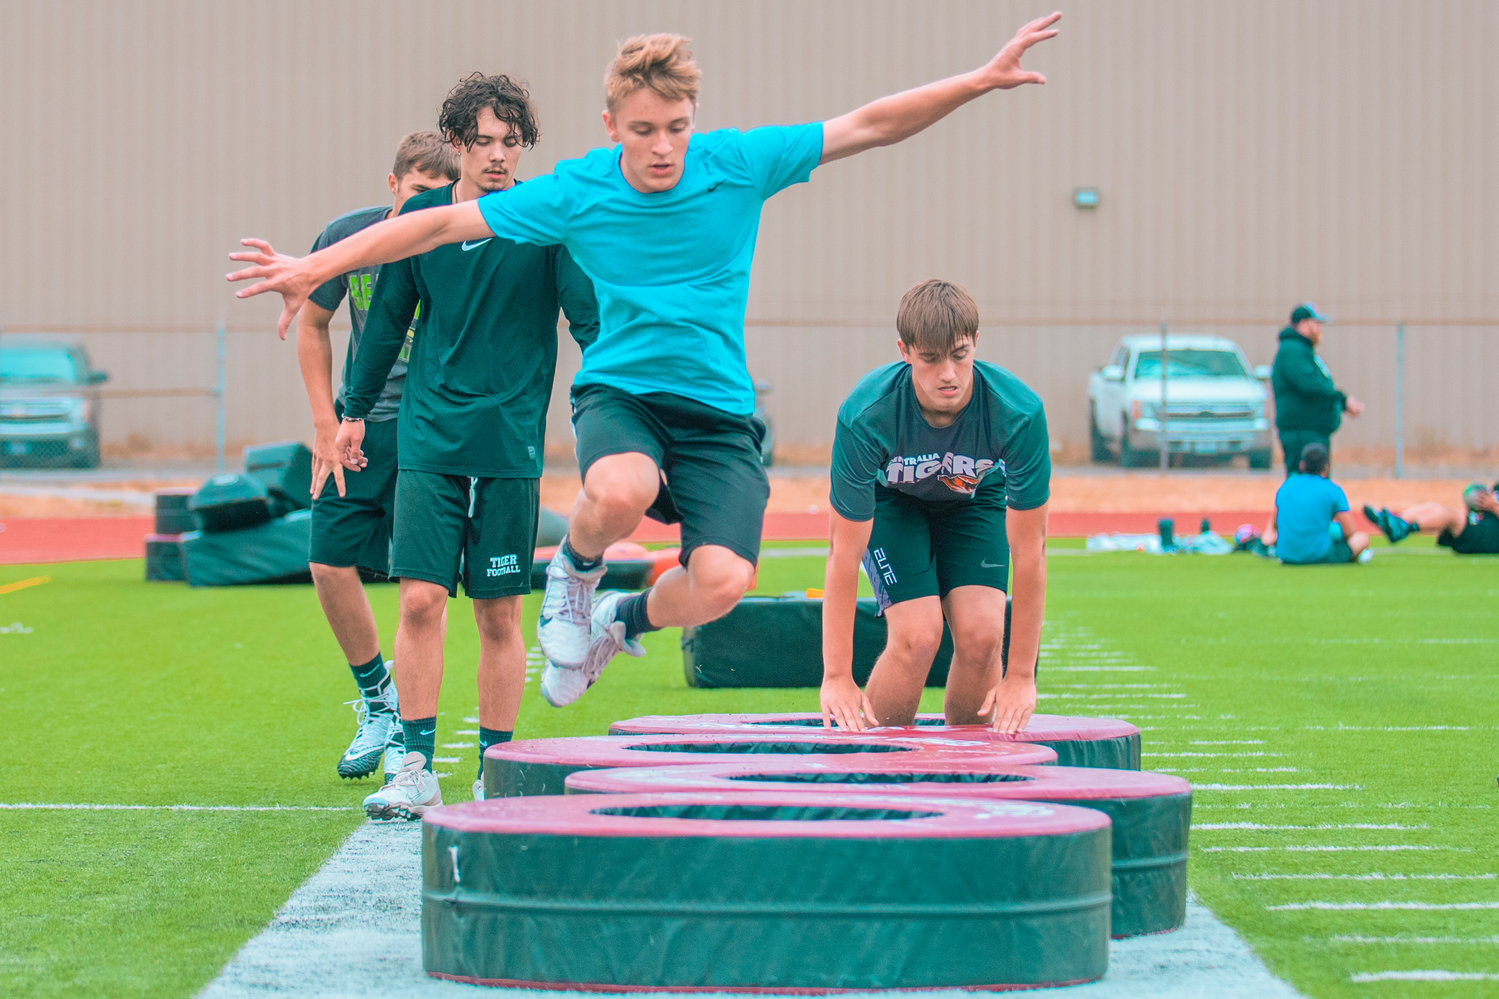 Centralia sophomore Kellen Rooklidge jumps through tires during a drill on the opening day of football practice Wednesday.